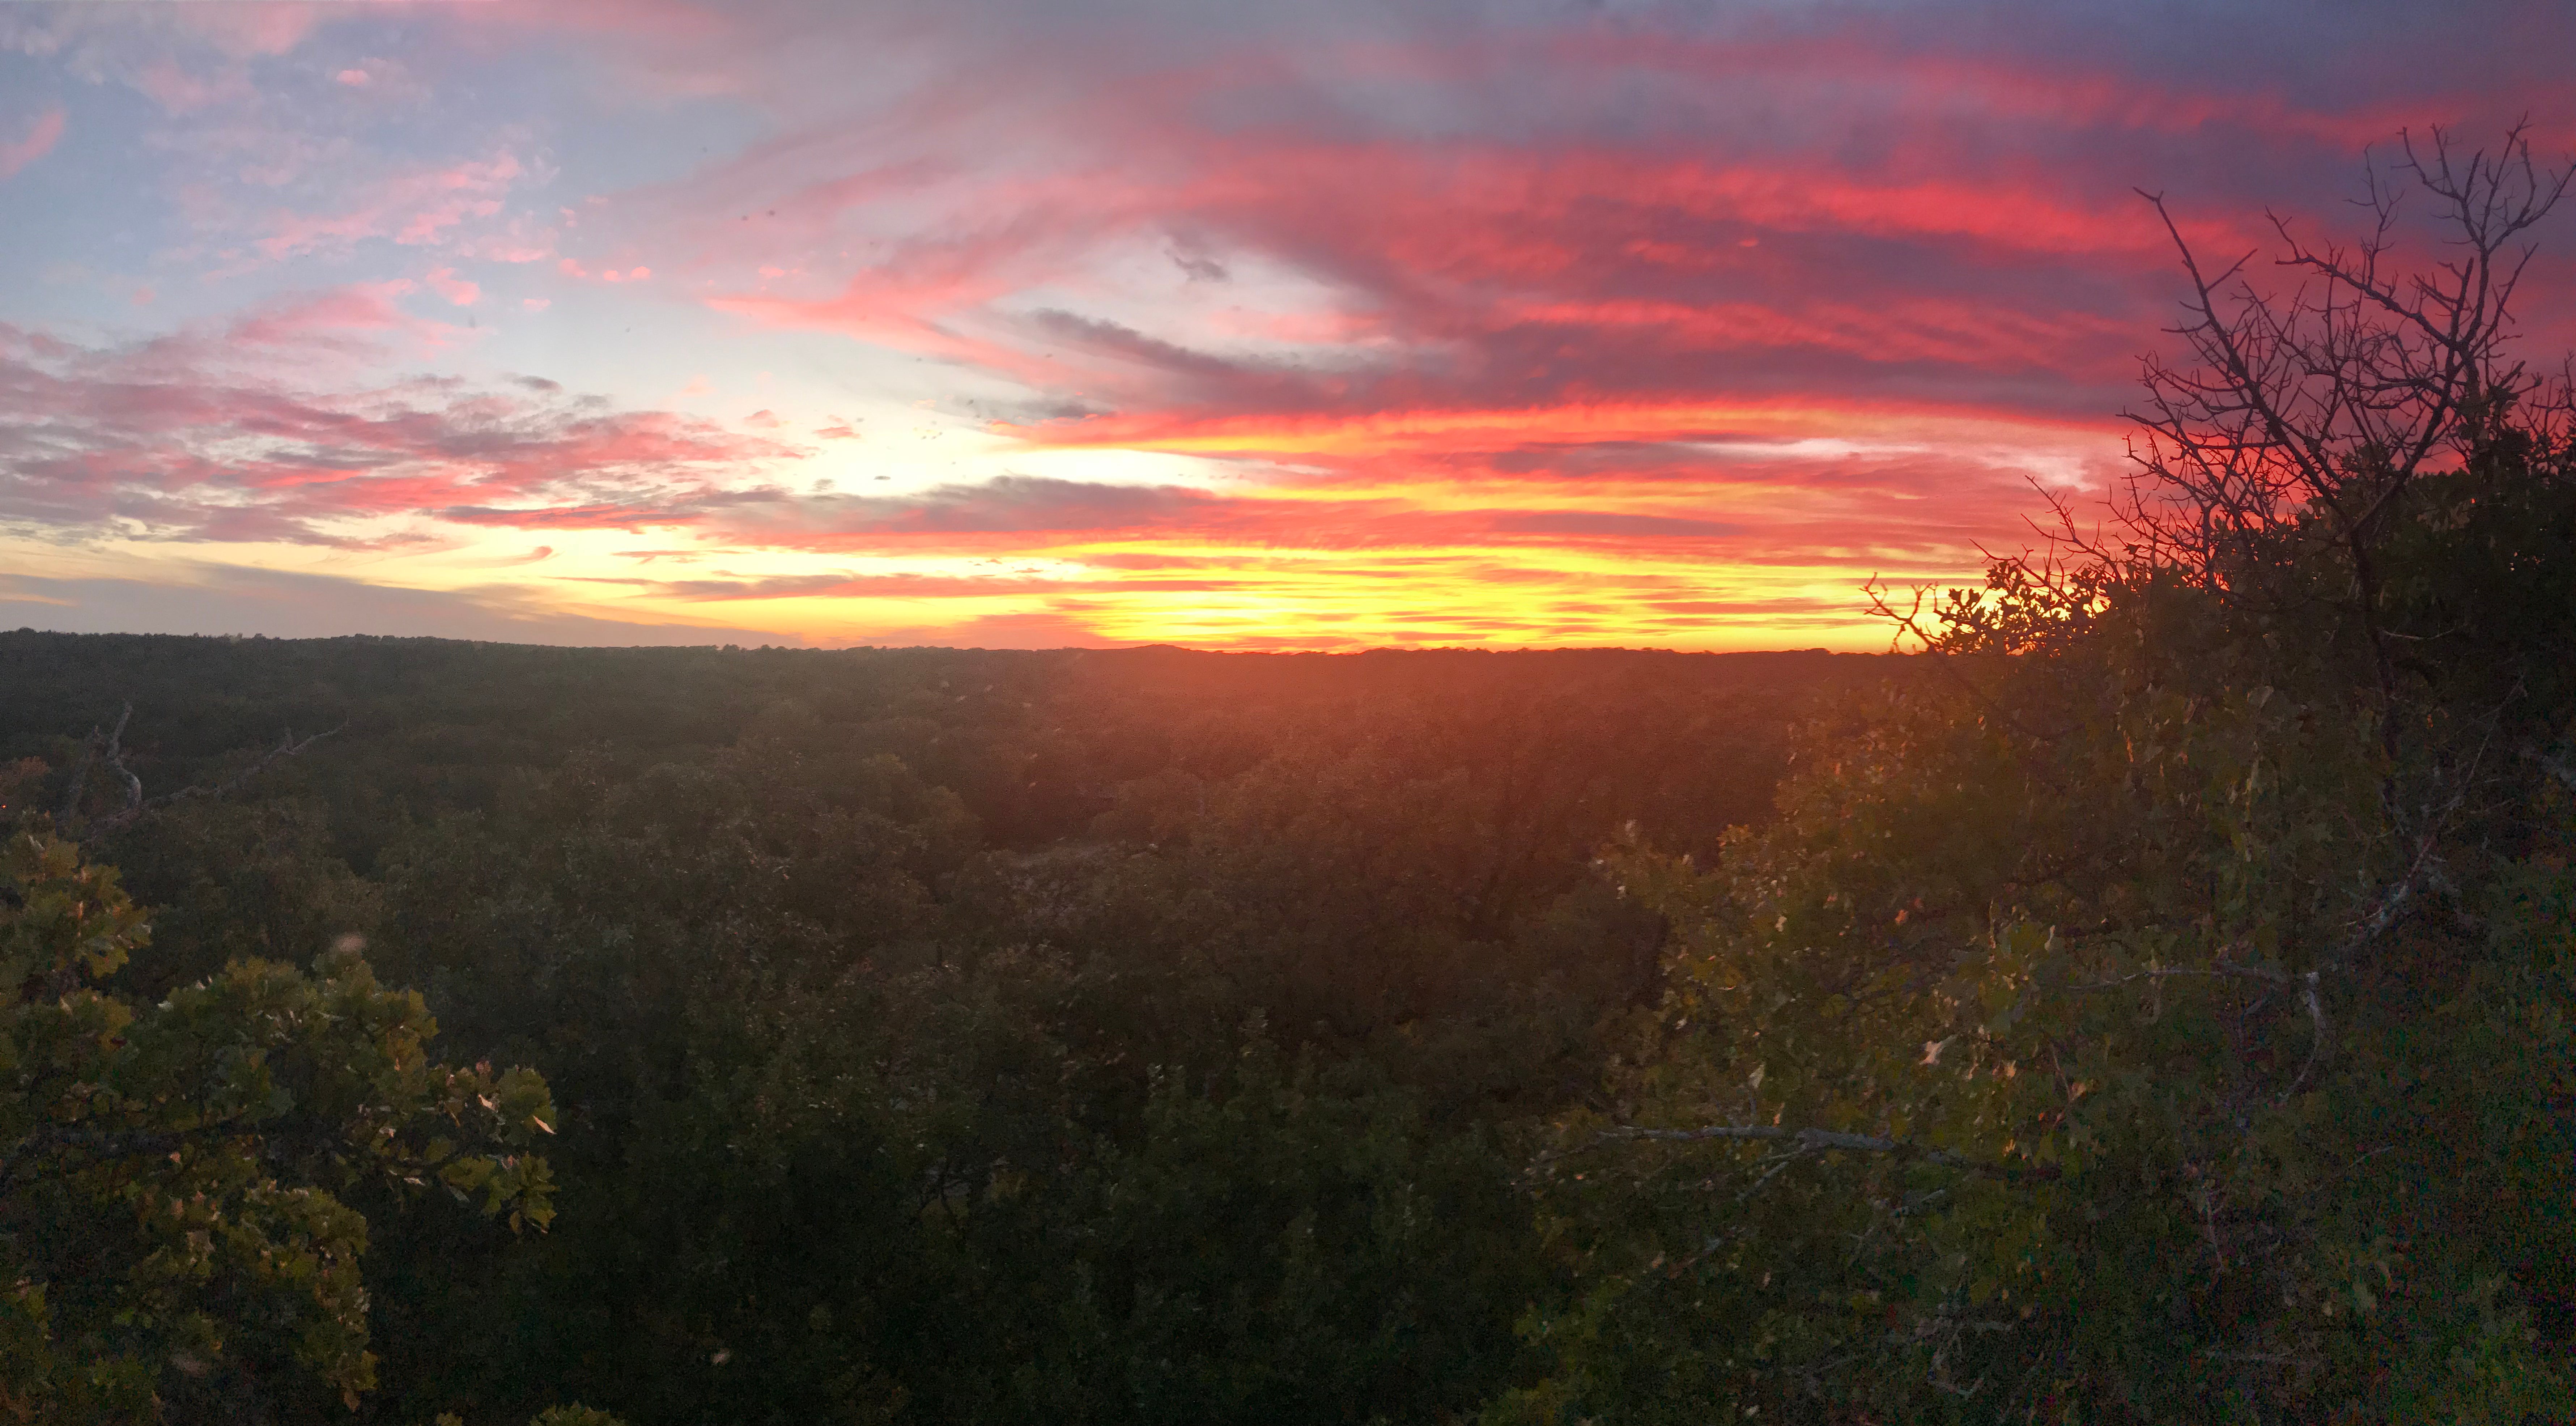 Sunset from Buzzards Roost scenic overlook trail